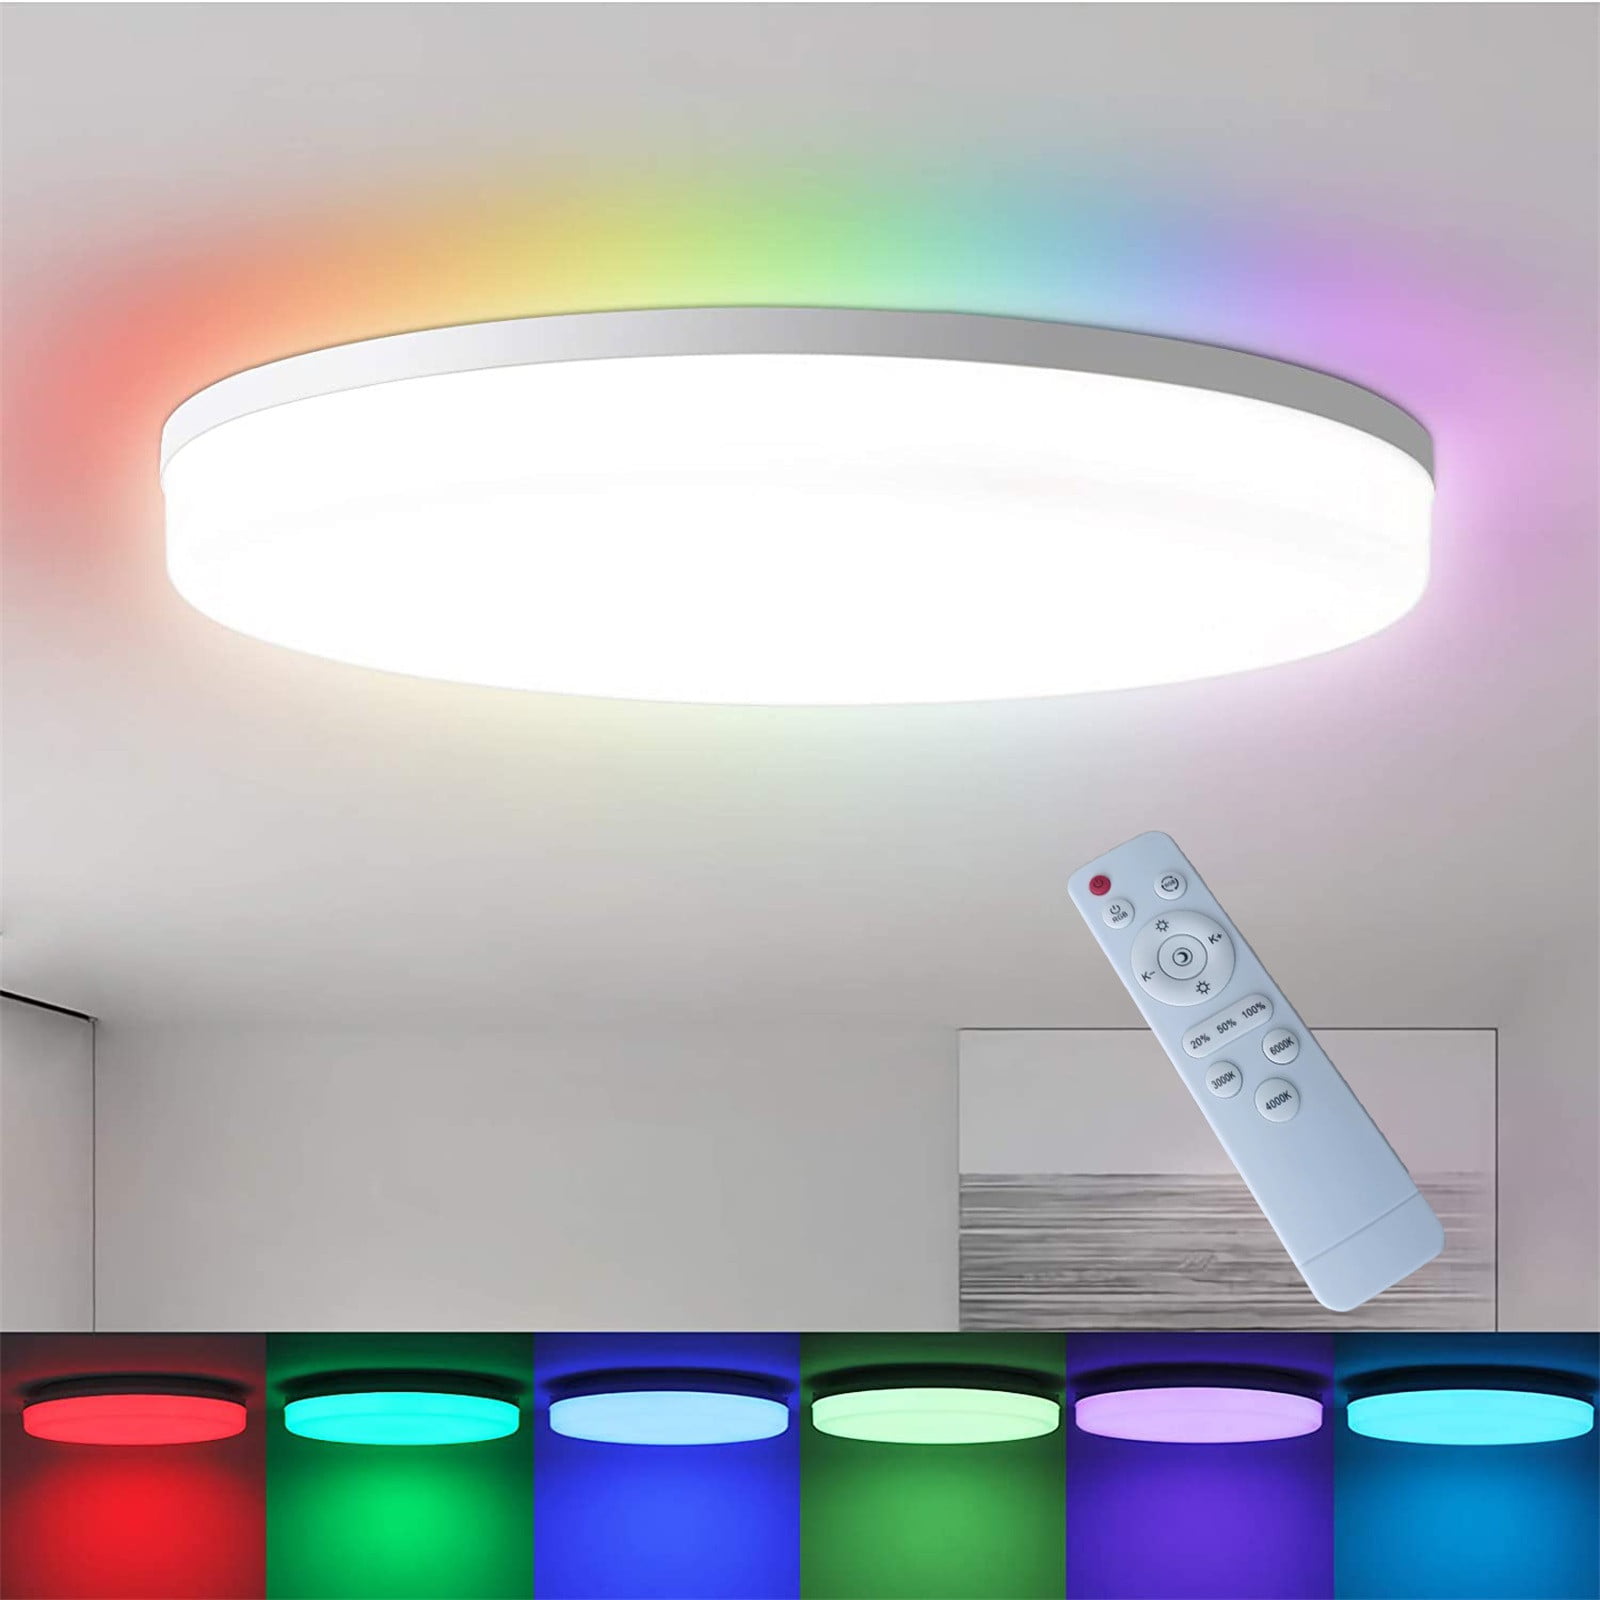 XEOVHV Embedded Intelligent Ceiling Lamp LED WiFi And Alexa Compatible  Adjustable-backlight WiFi Intelligent Ceiling Lamp The best choice for  saving money